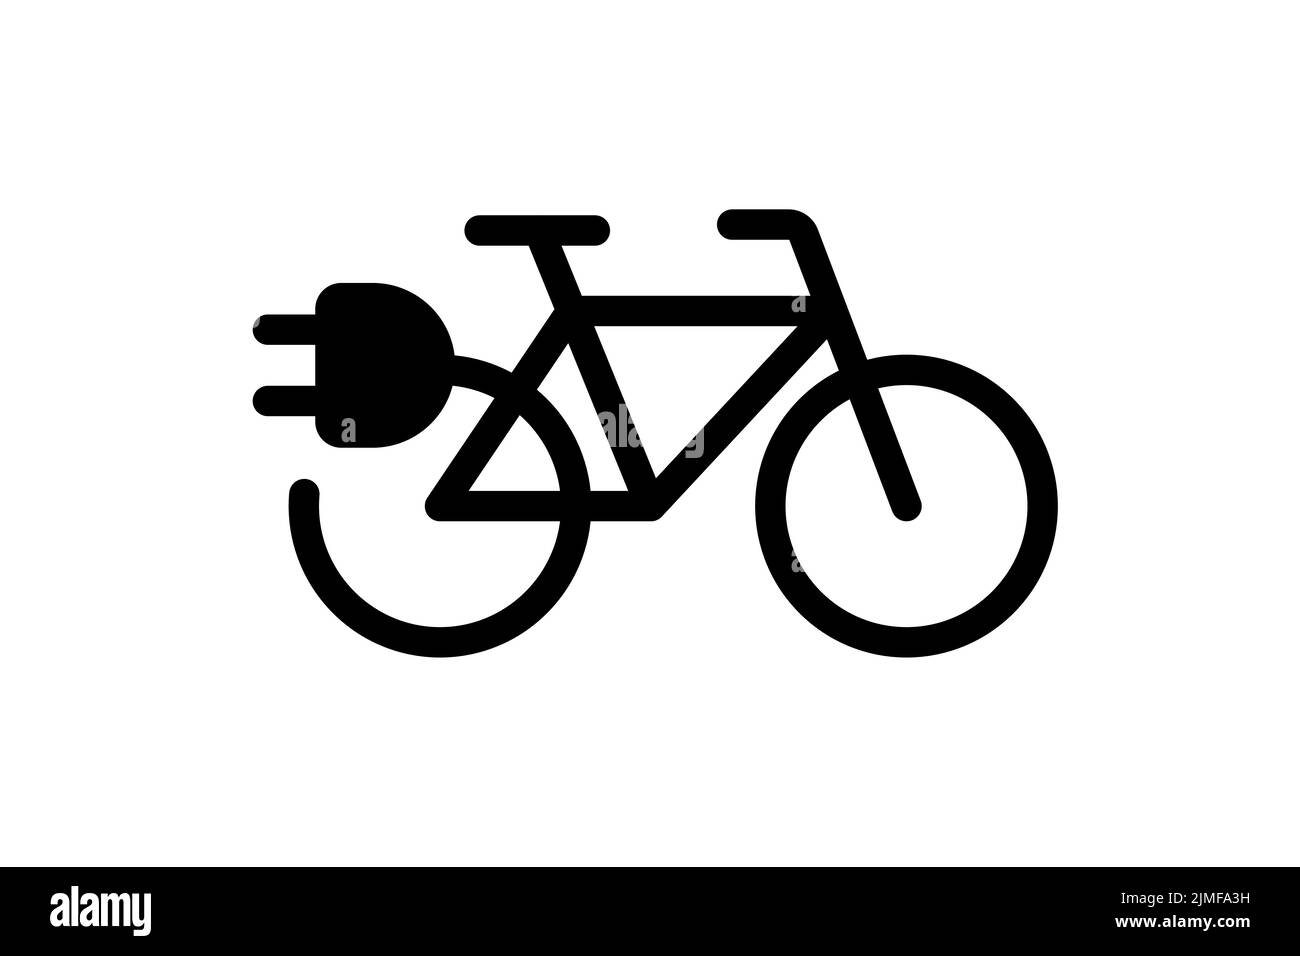 Electric bicycle icon. Black cable electrical bike contour and plug charging symbol. Eco friendly electro cycle vehicle sign concept. Vector battery powered e-bike transportation eps illustration Stock Vector